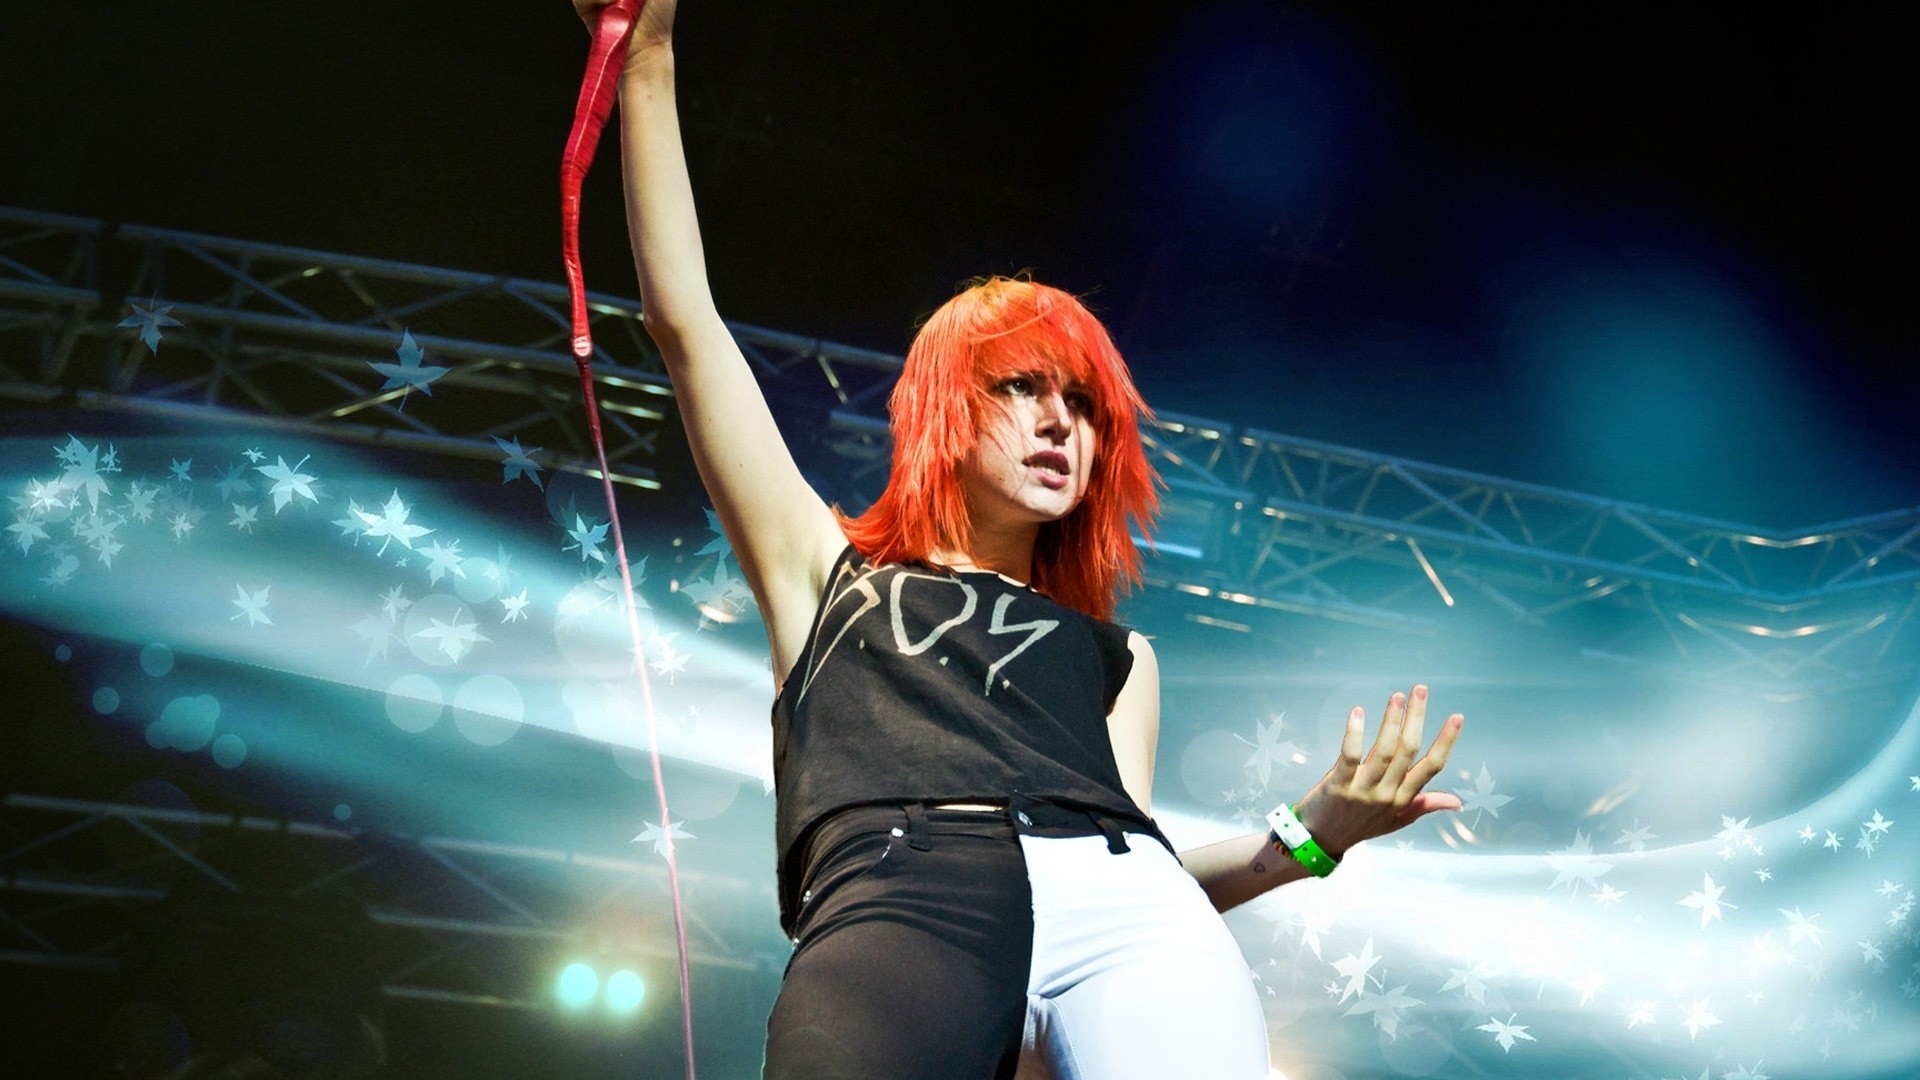 People 1920x1080 Hayley Williams Paramore singer women redhead dyed hair arms up standing microphone